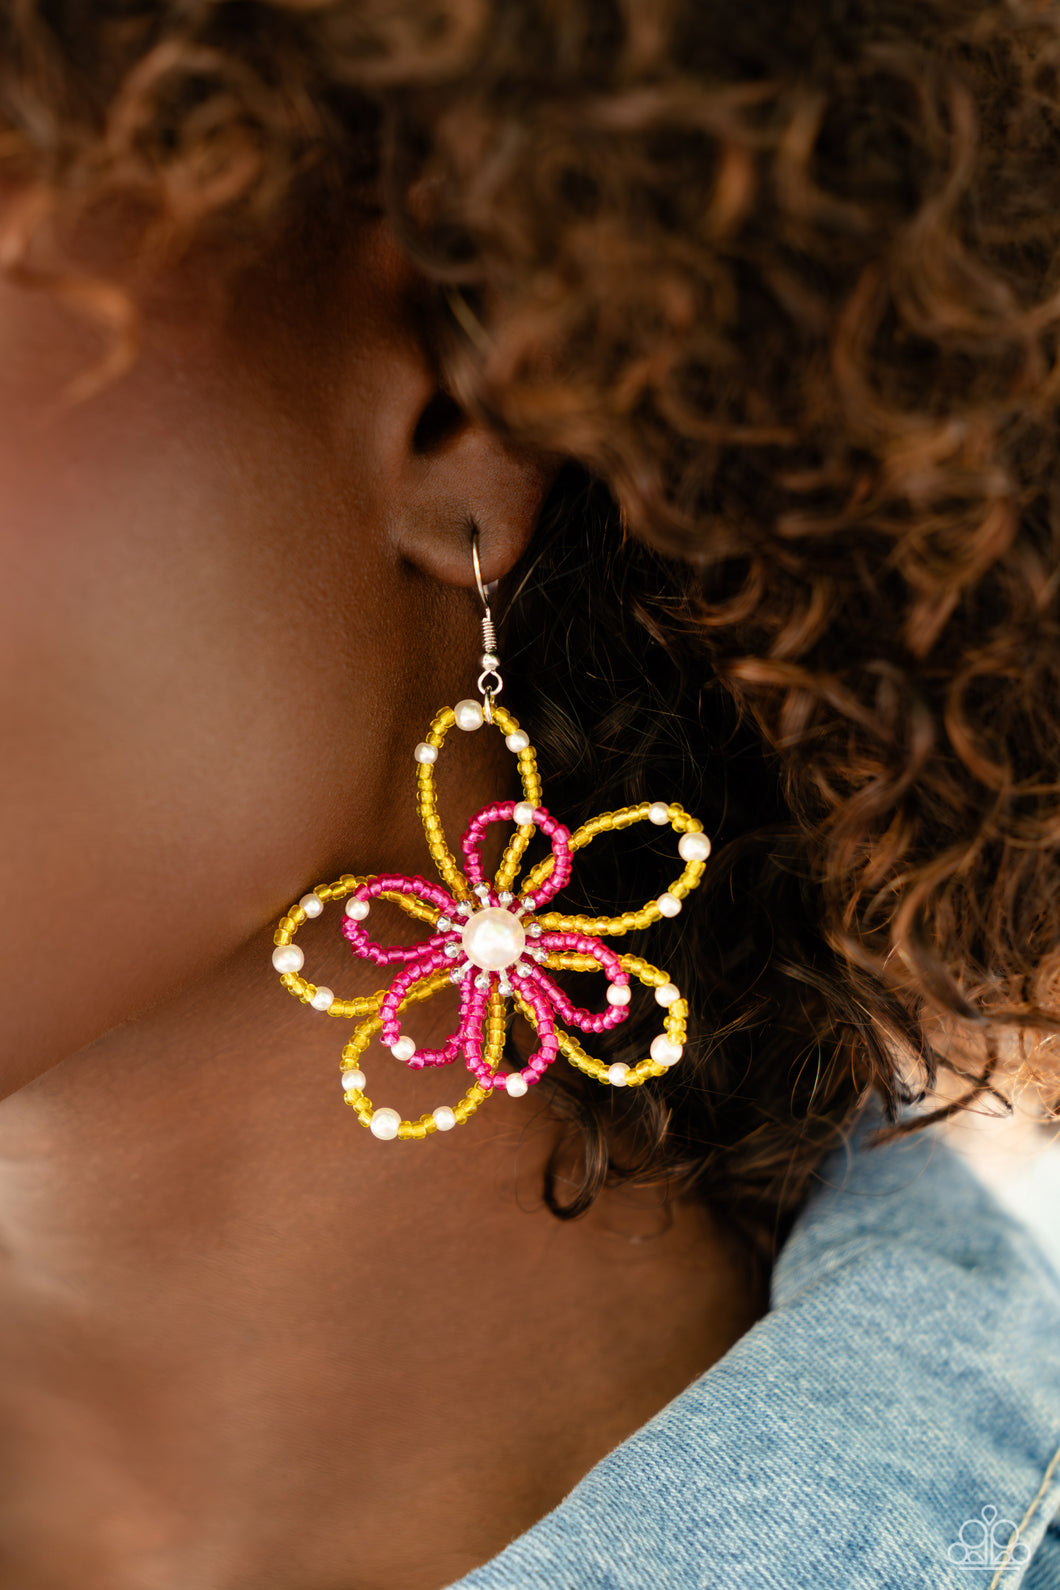 A glossy white pearl blooms from the center of a layered Pink Peacock and High Visibility glassy seed bead flower, infused with additional dainty white pearls, creating a colorful floral frame. Earring attaches to a standard fishhook fitting.  Sold as one pair of earrings.